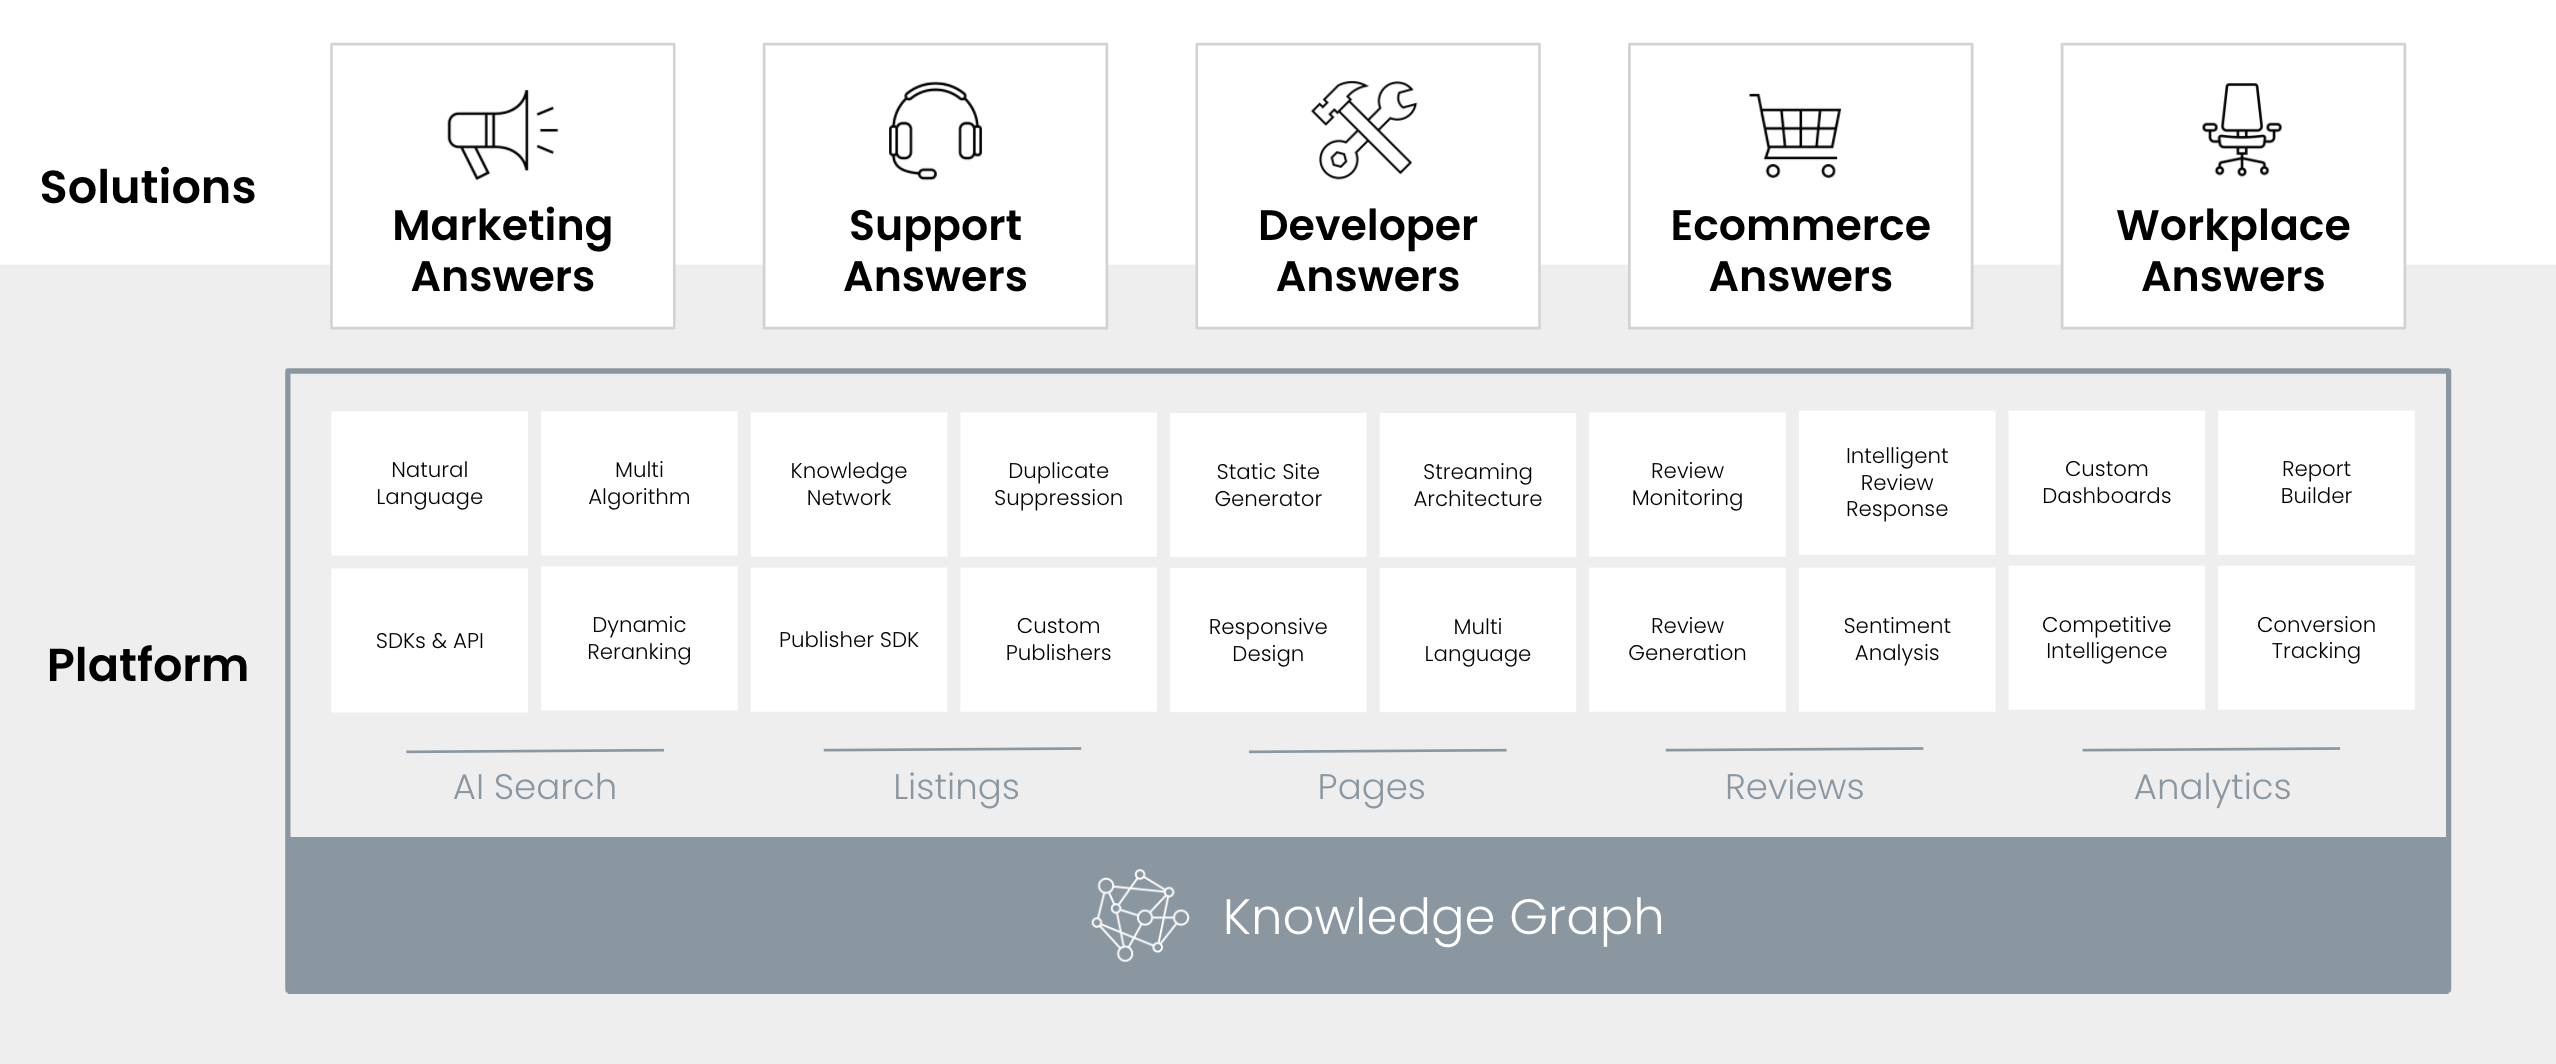 Graphic listing the name of the components that make up The Answers Platform - Pages, Listings, Knowledge Graph, Search, Analytics, Connectors, Reviews